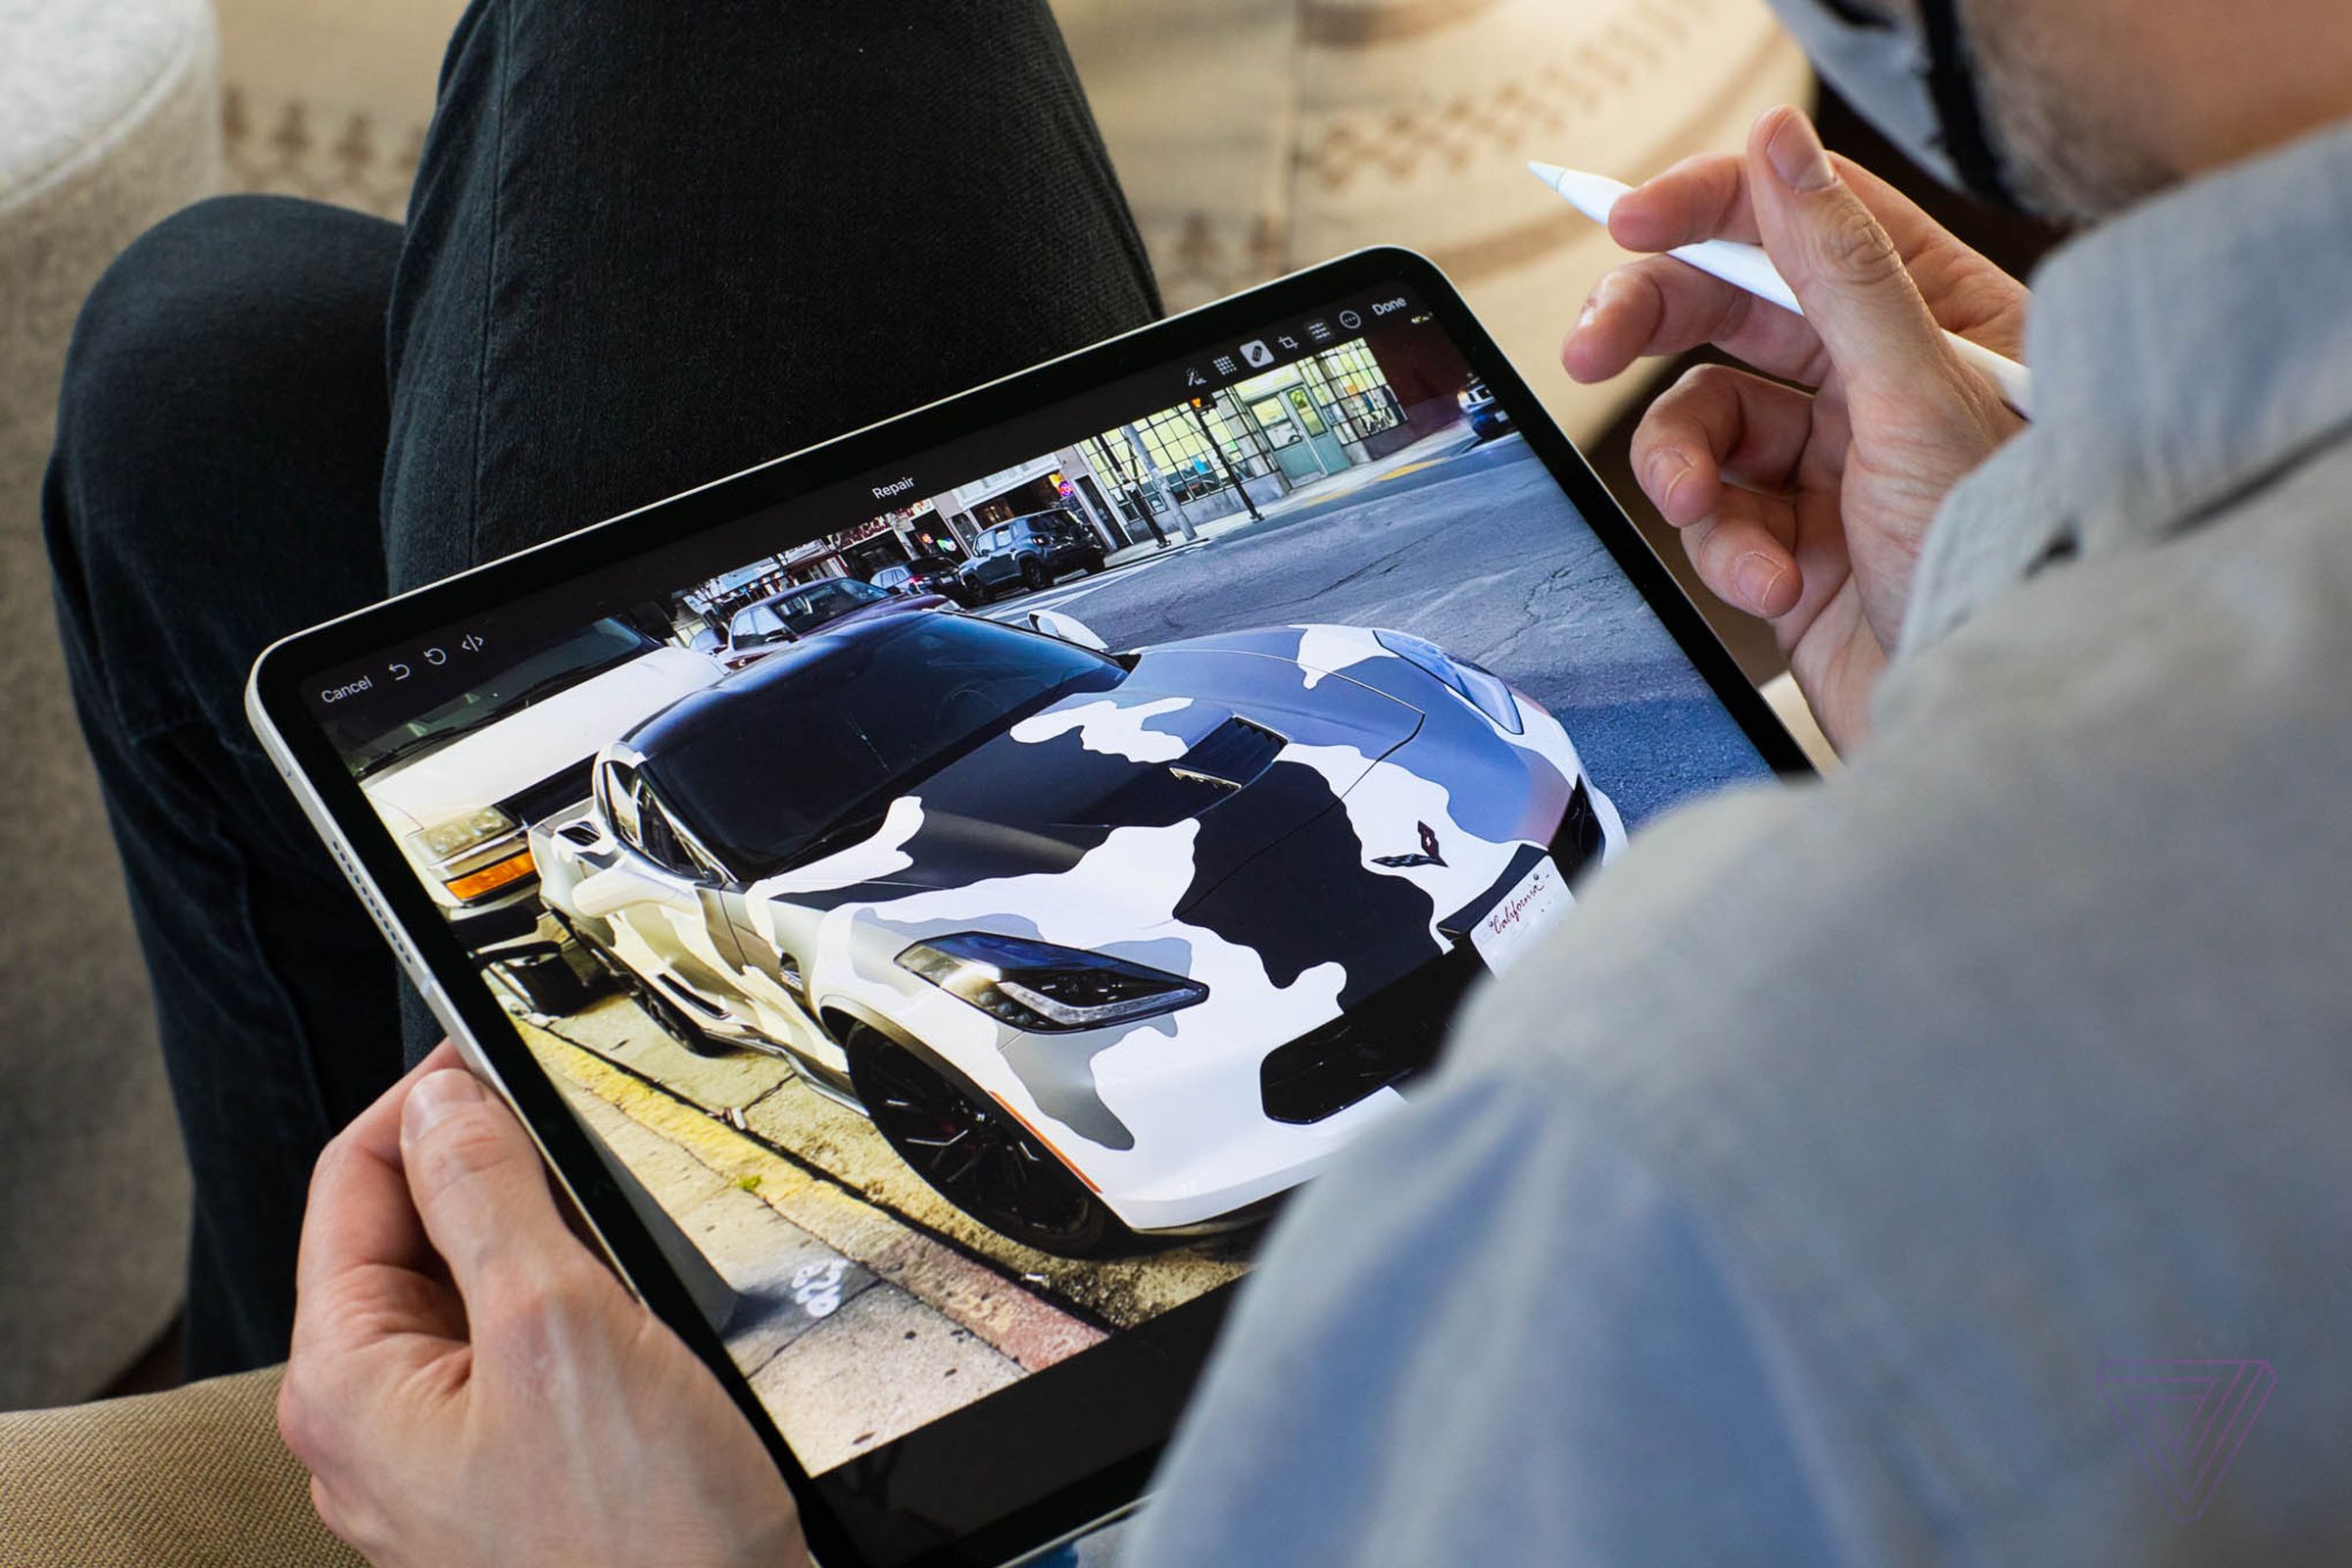 iPad Pro on a person's lap while using an Apple Pencil to edit a photo on the tablet.